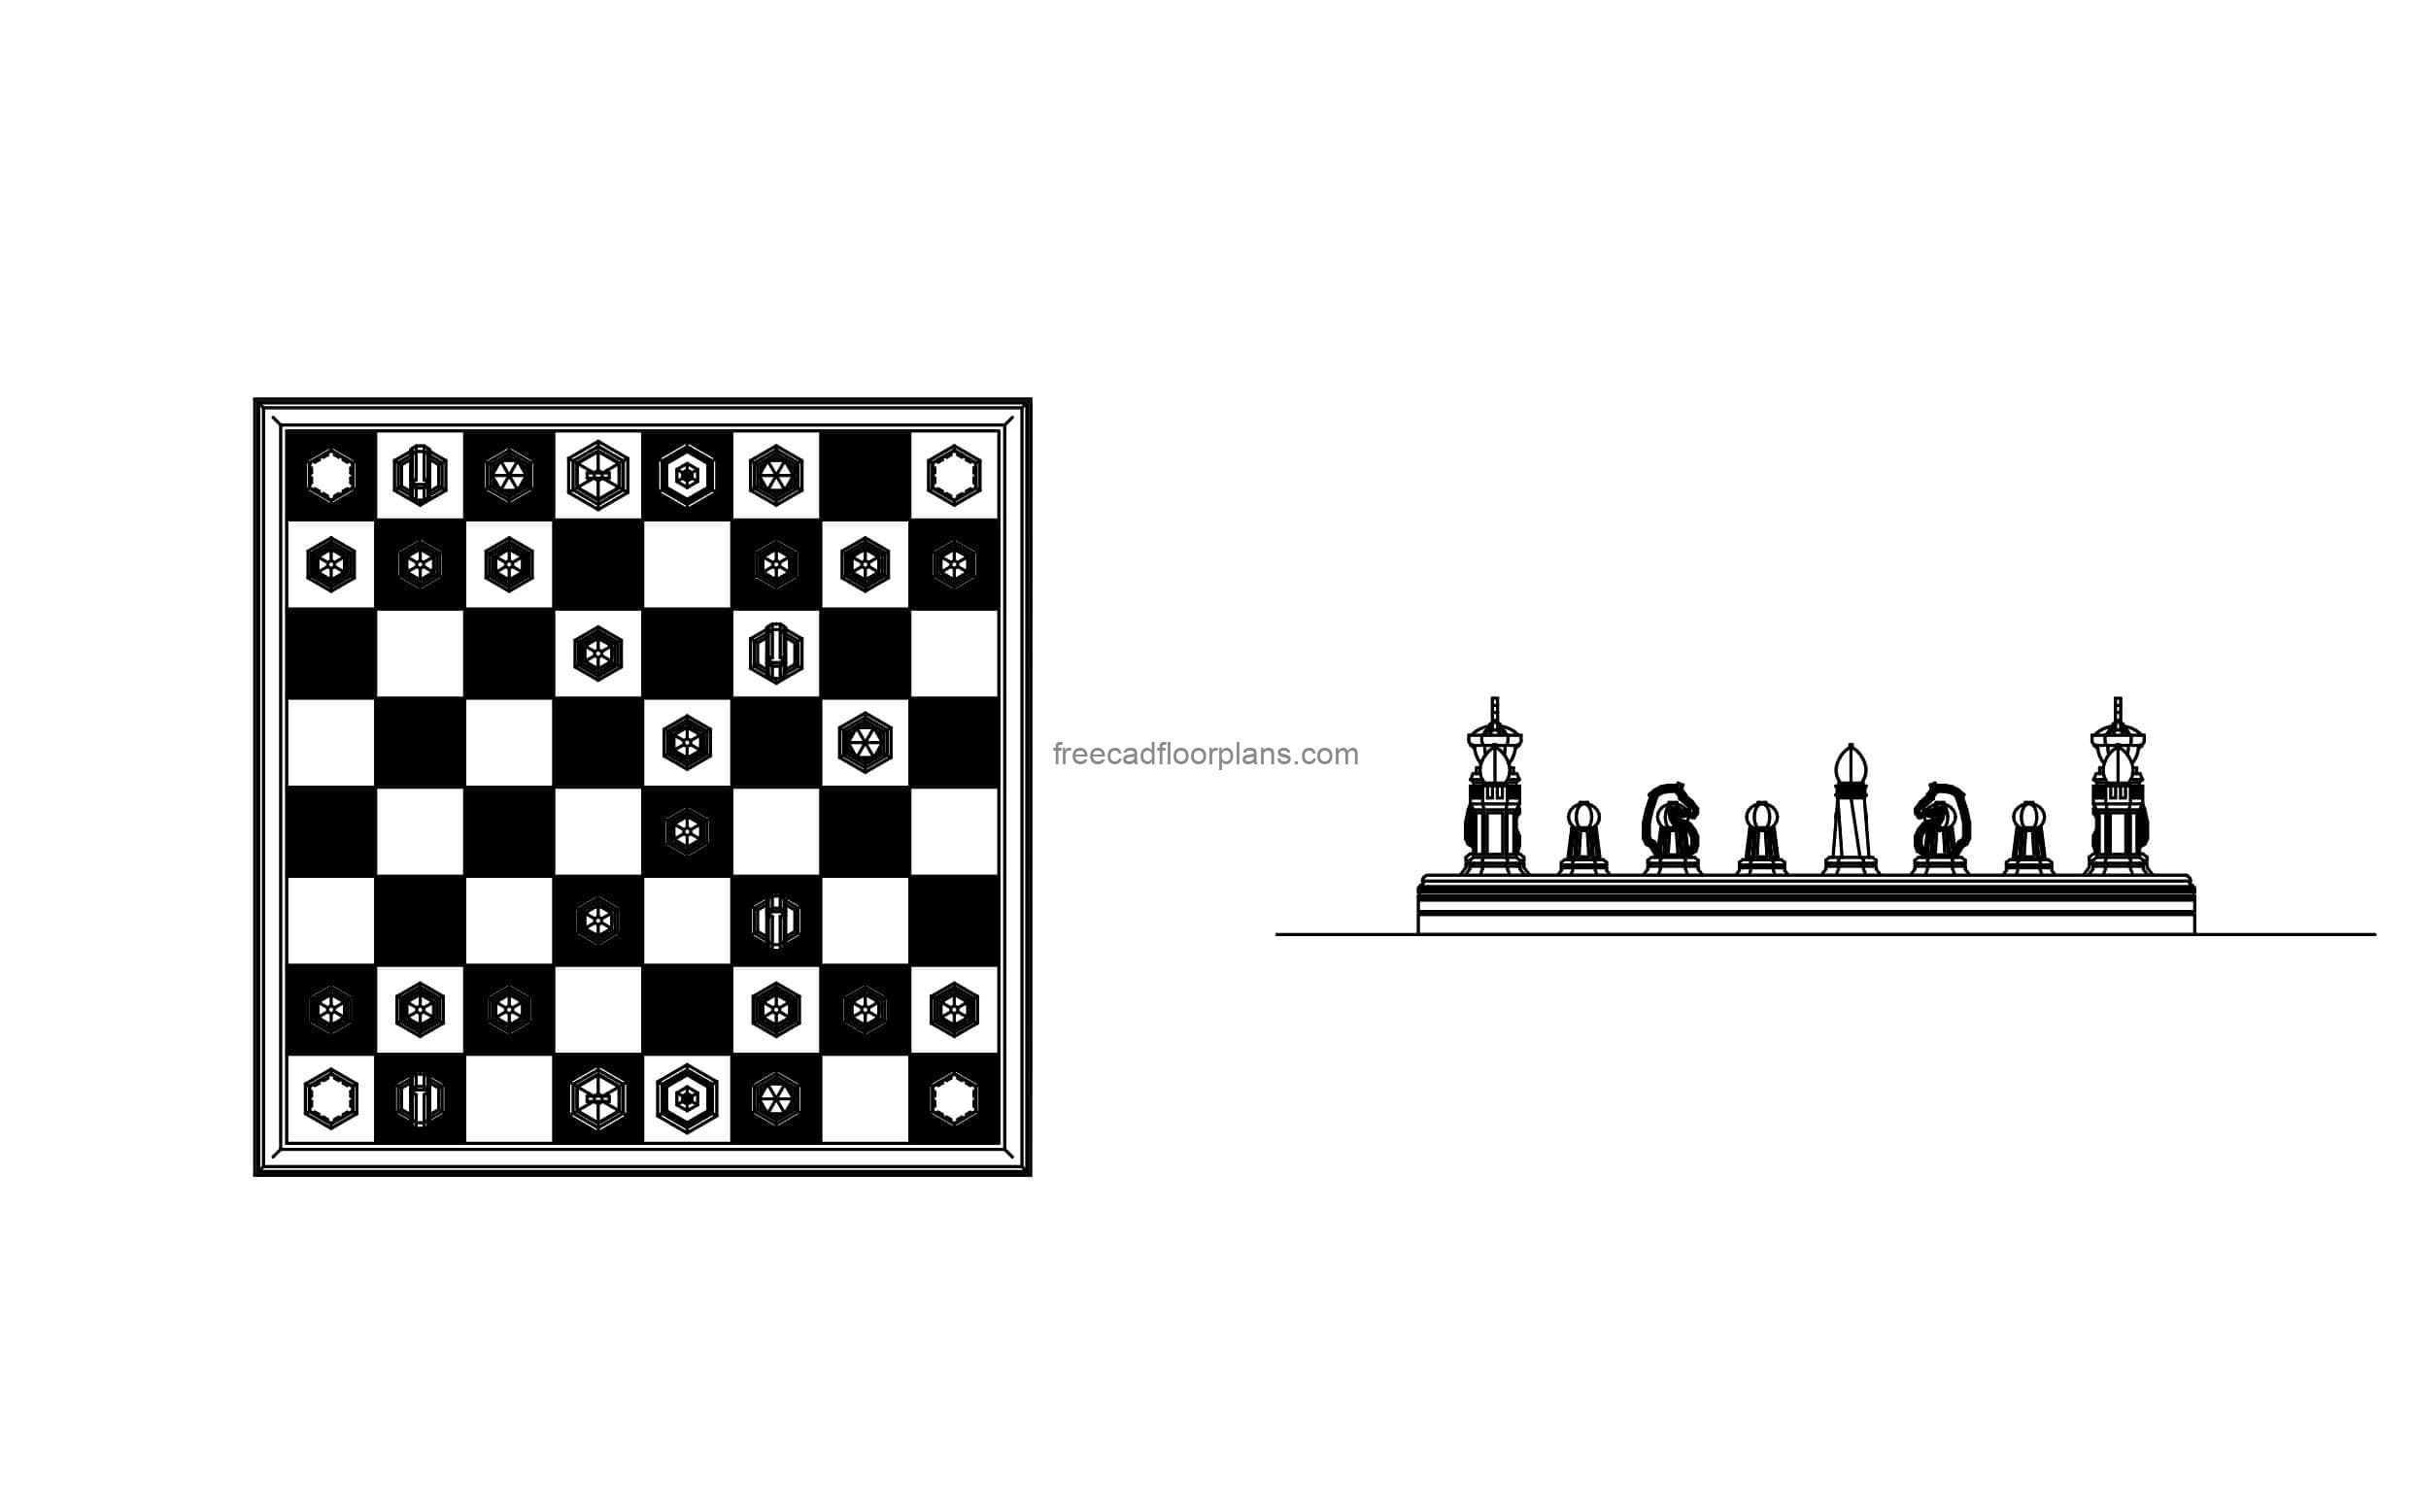 chessboard autocad drawing with plan and elevations views, cad block for free download